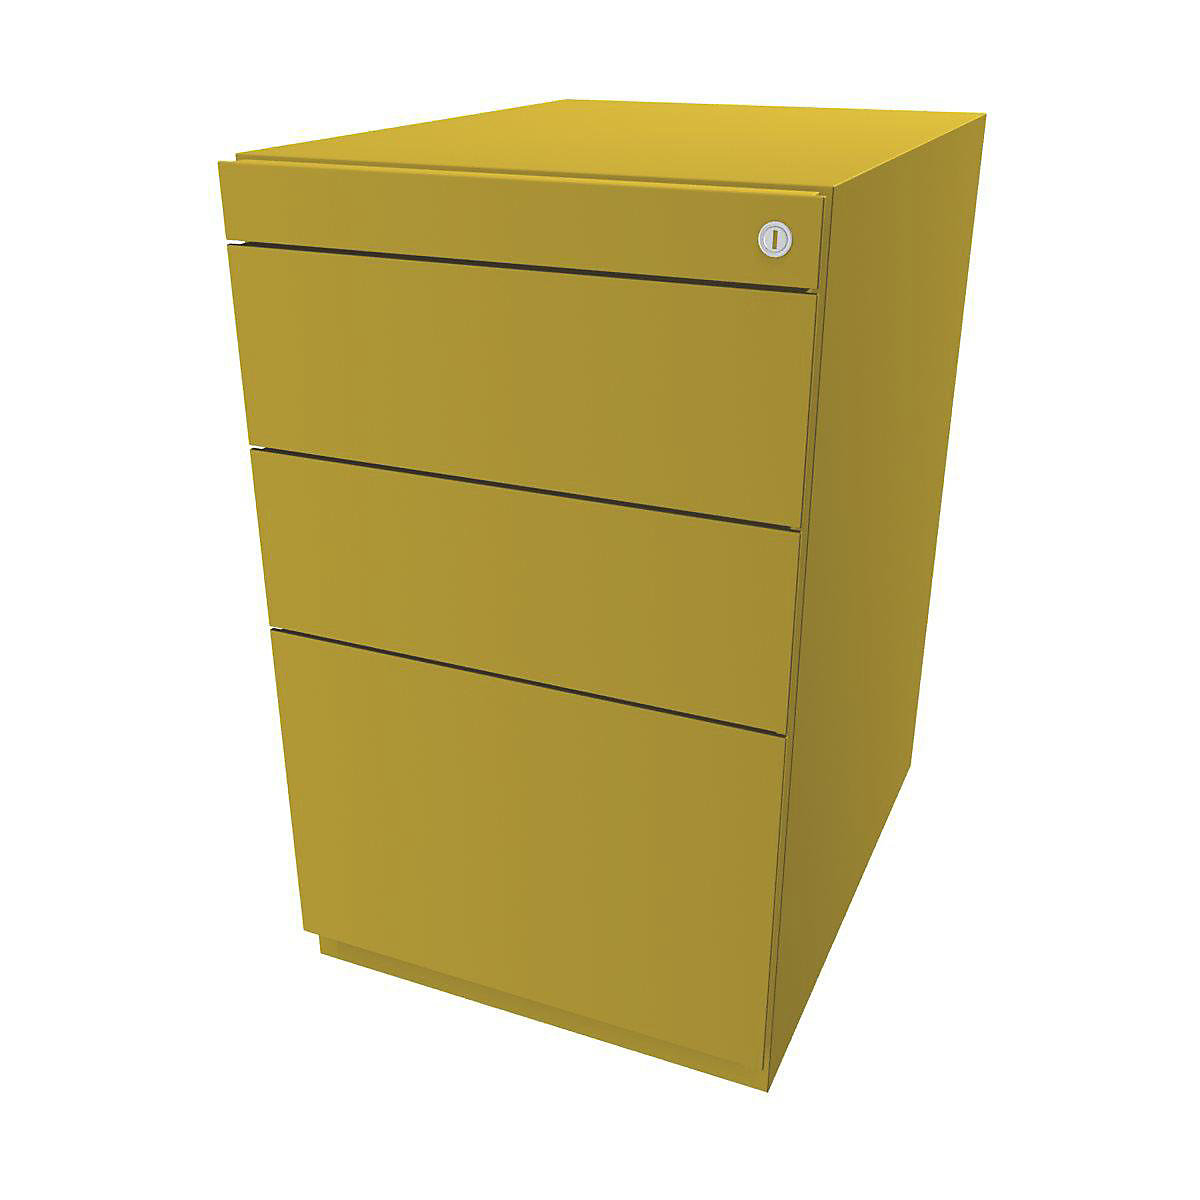 Note™ fixed pedestal, with 2 universal drawers, 1 suspension file drawer – BISLEY, without top, depth 565 mm, yellow-3